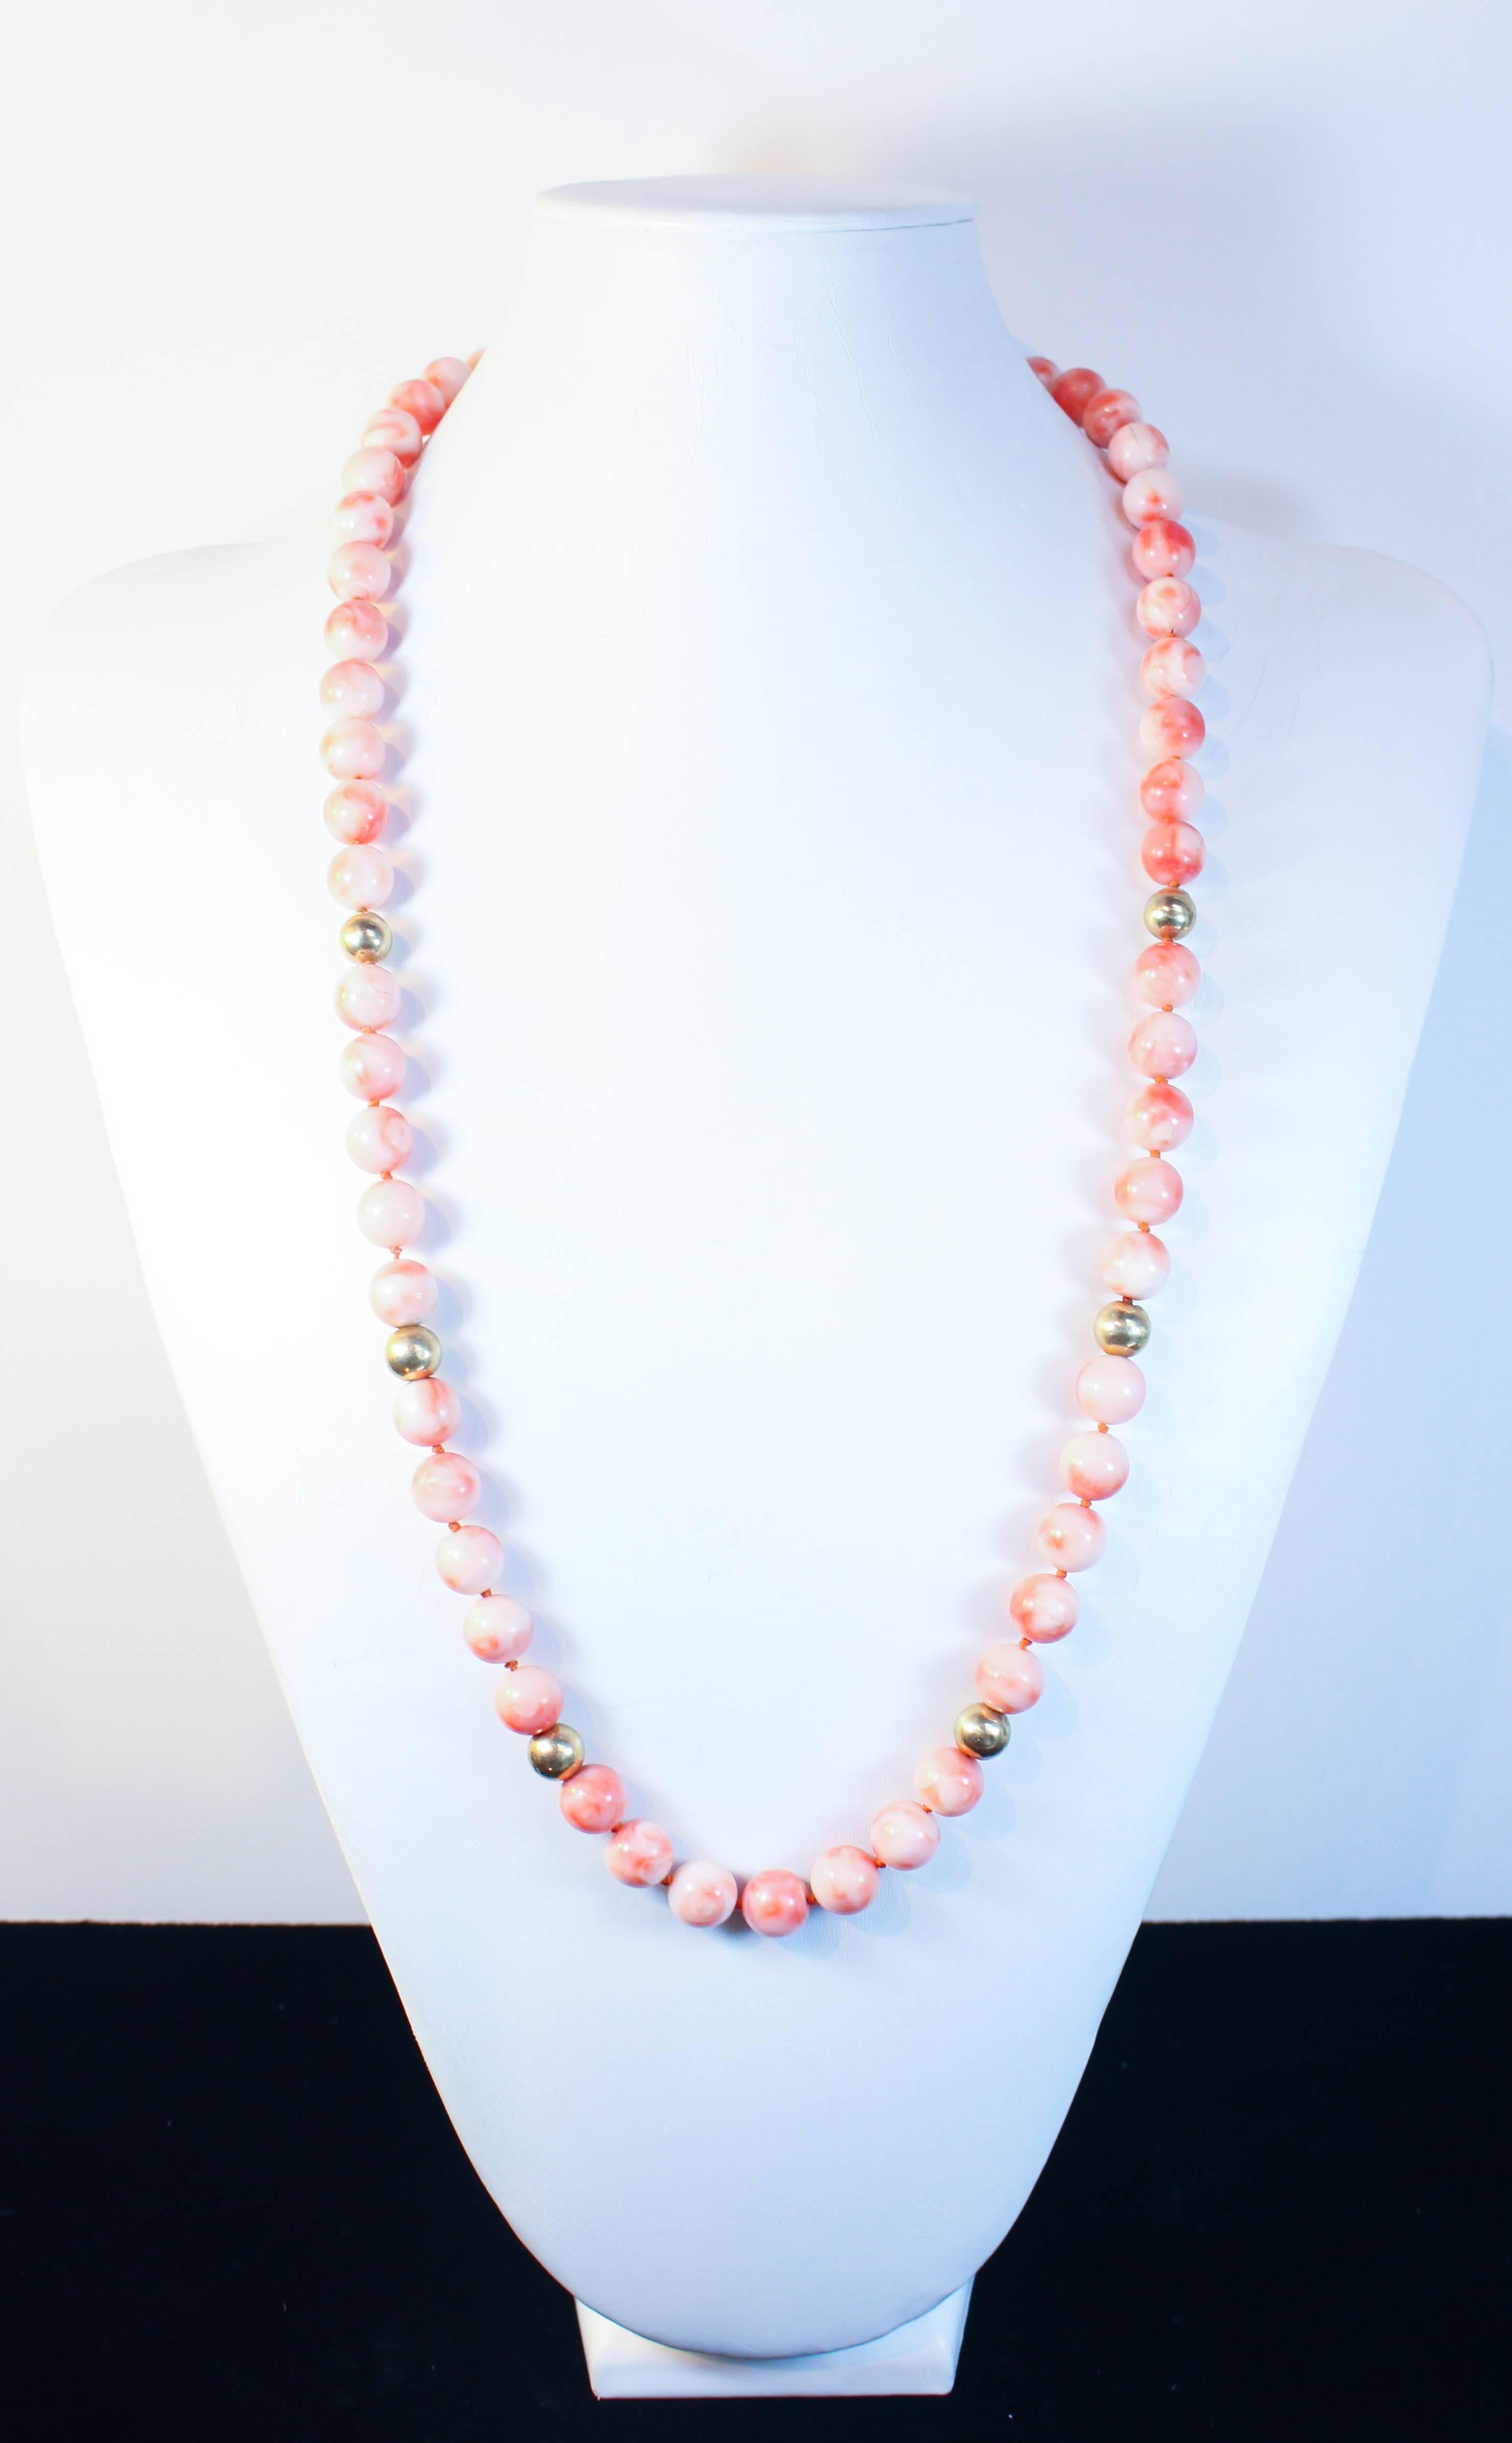 This necklace is composed of light coral beads with an approximate 11mm size. Features gold bead accents. In excellent condition.

Please feel free to ask any questions you may have, we are happy to assist. 

Specs:
14KT Yellow Gold Beads
Coral